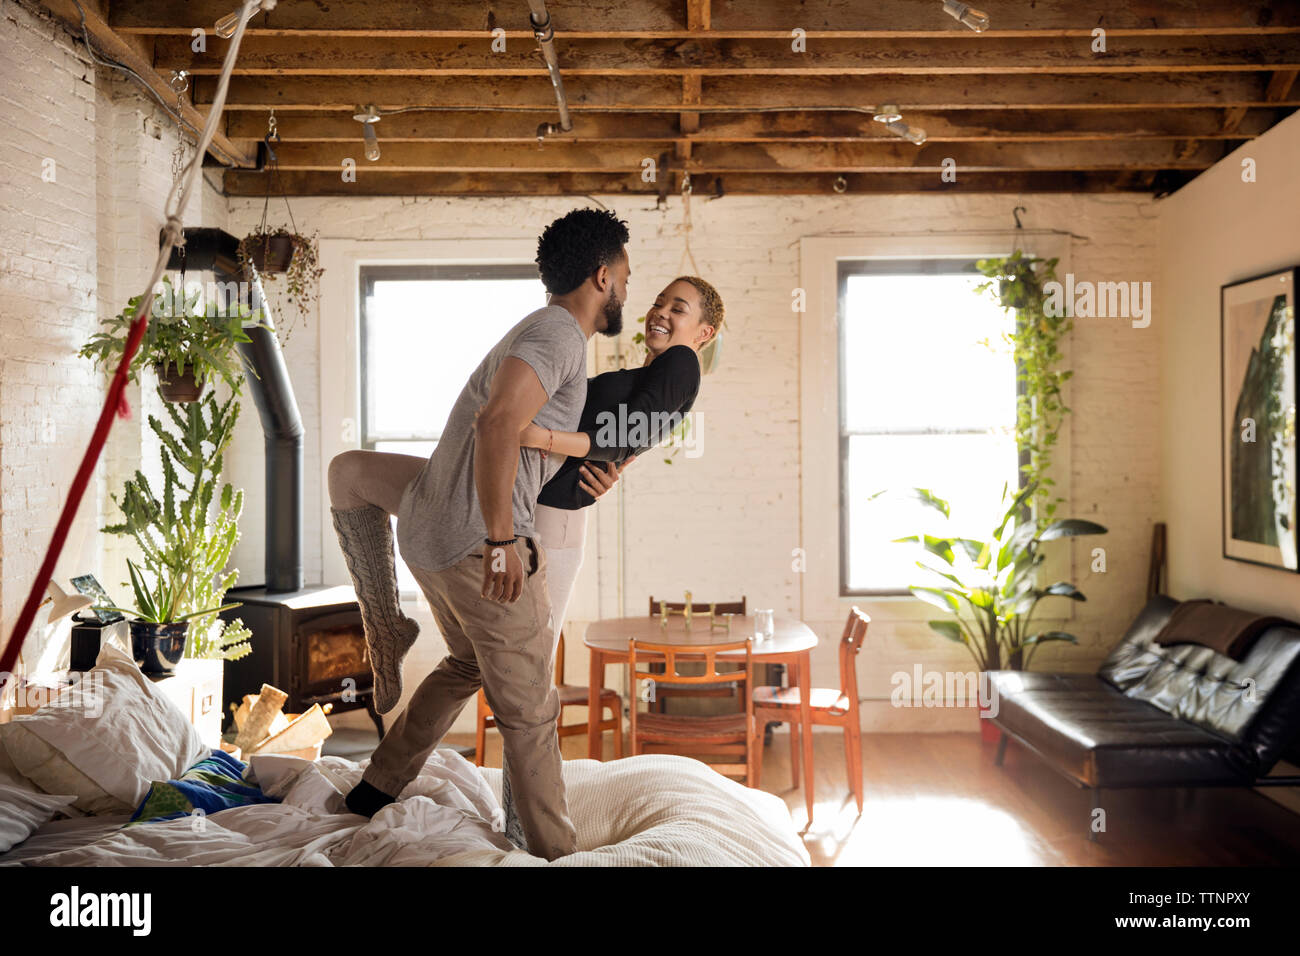 Cheerful multi-ethnic couple dancing on bed at home Banque D'Images